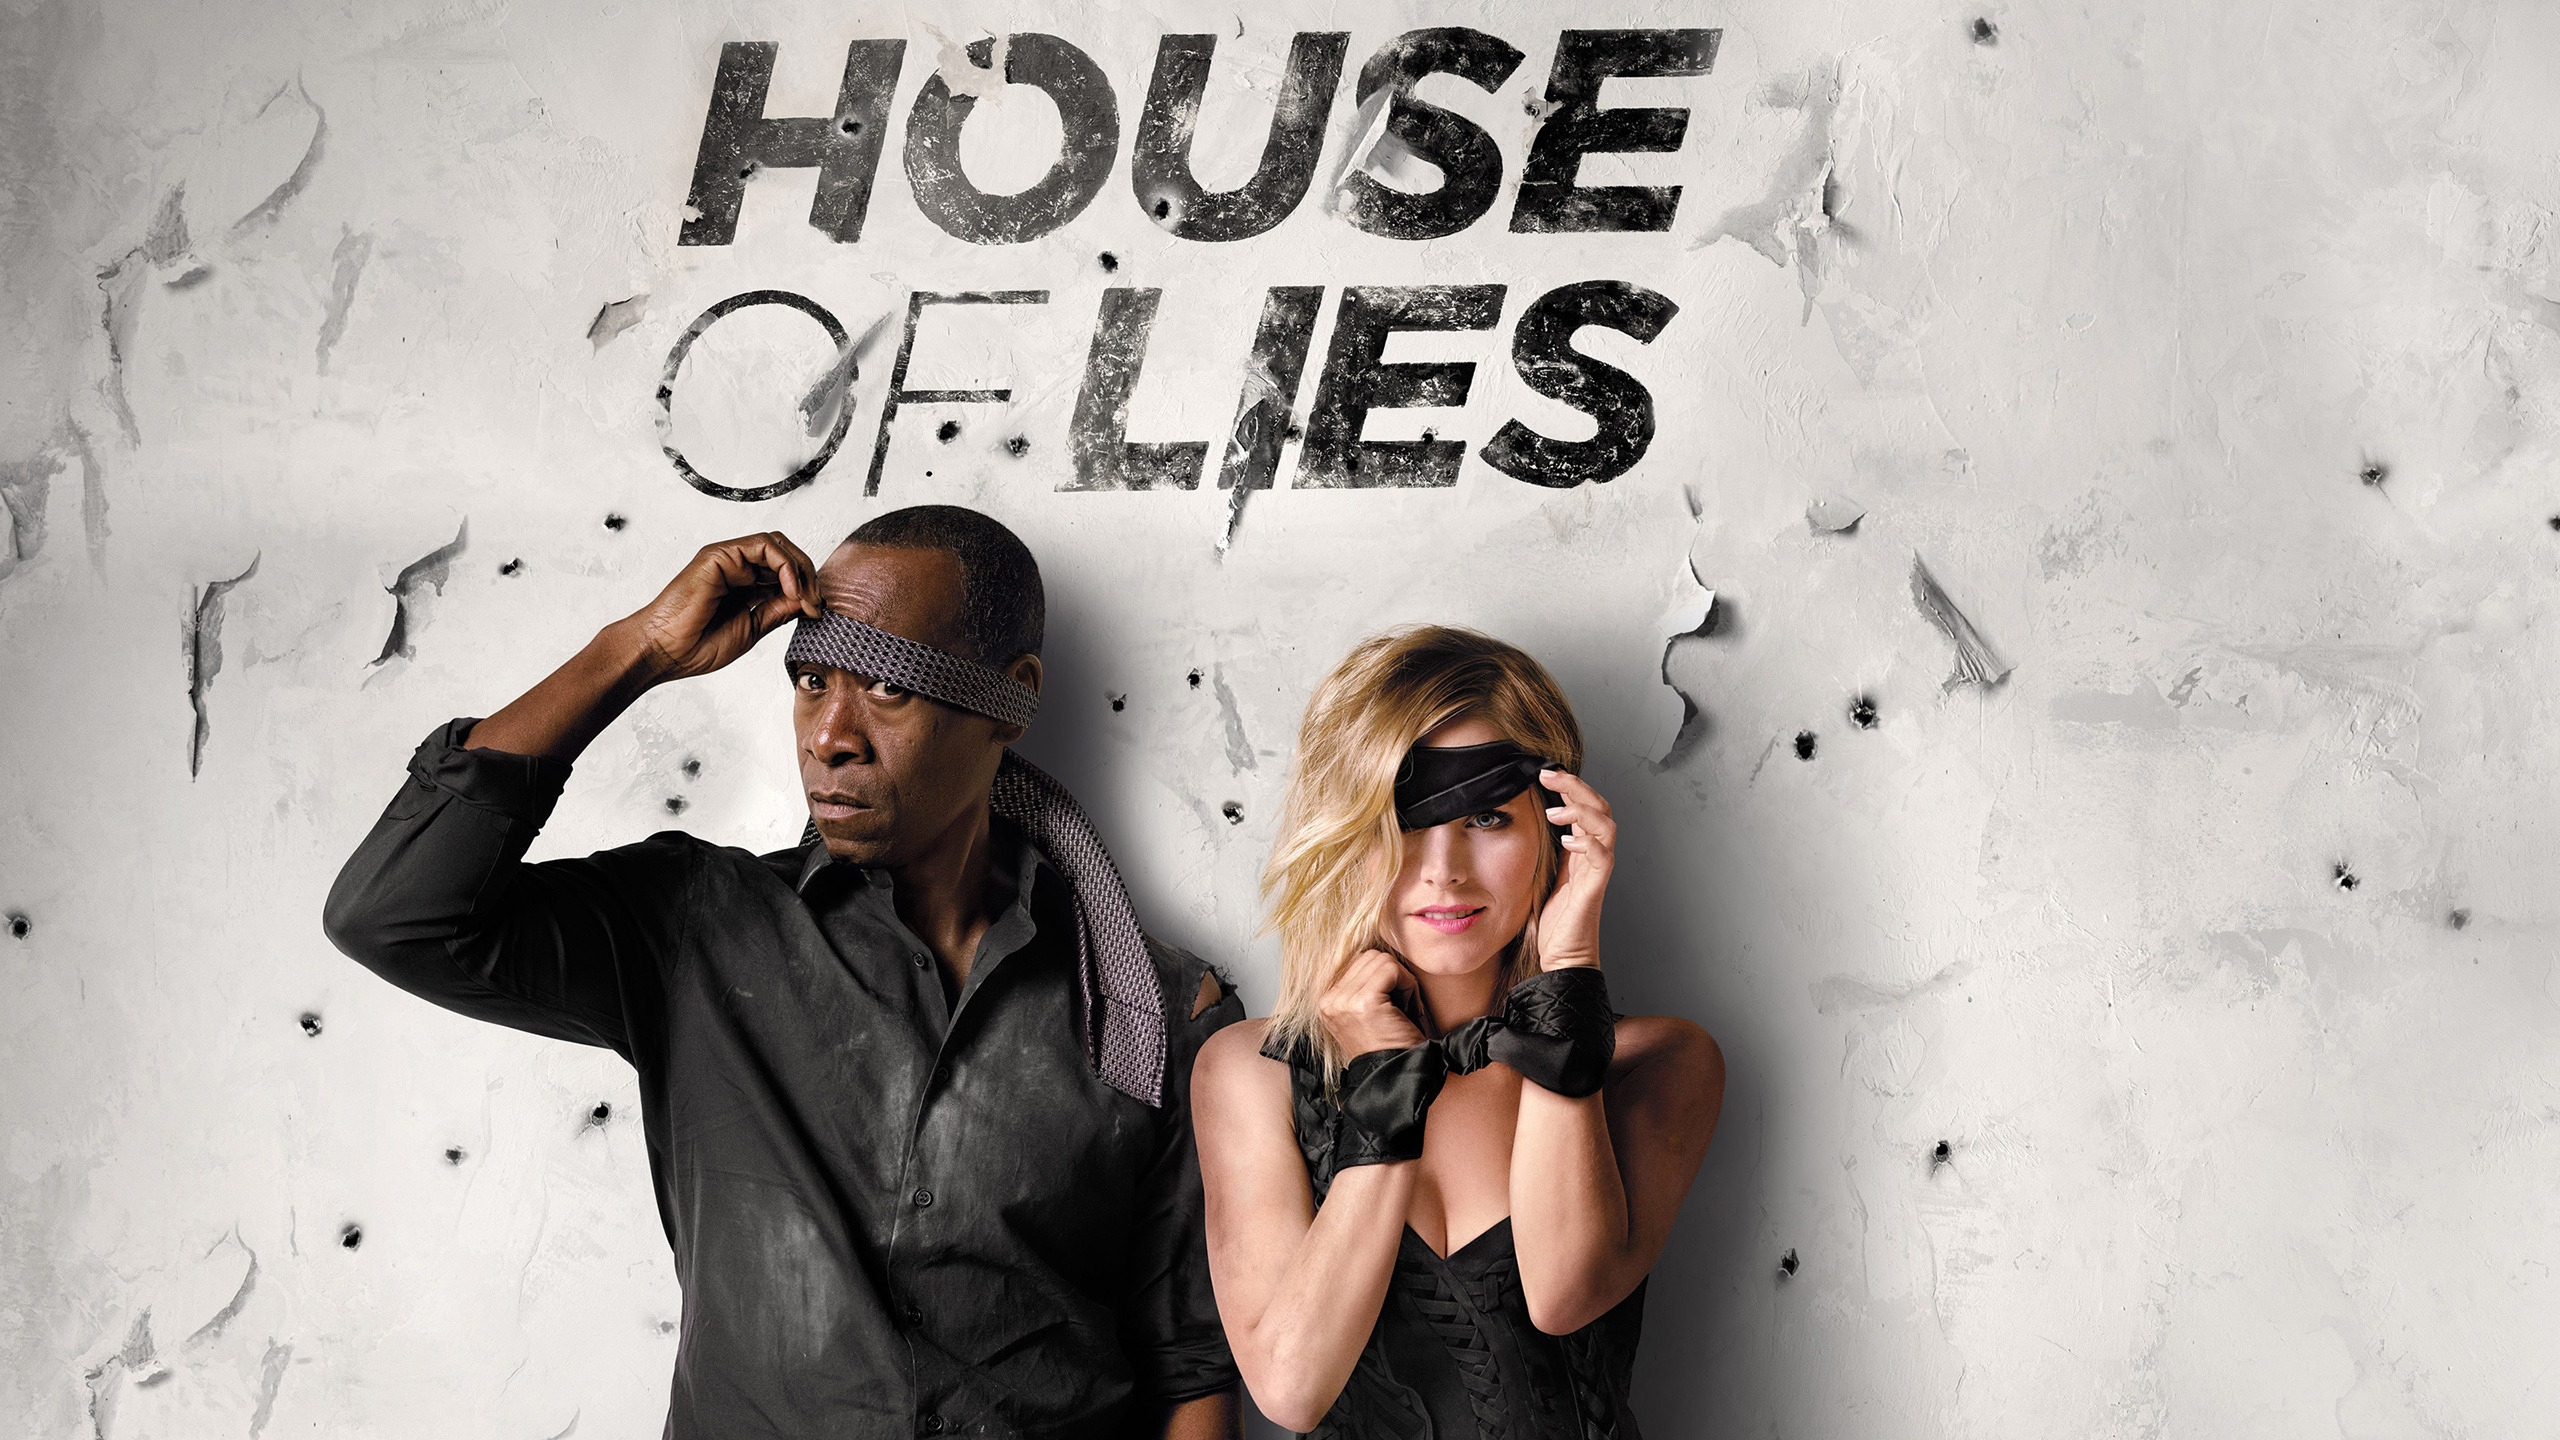 House of Lies for 2560x1440 HDTV resolution